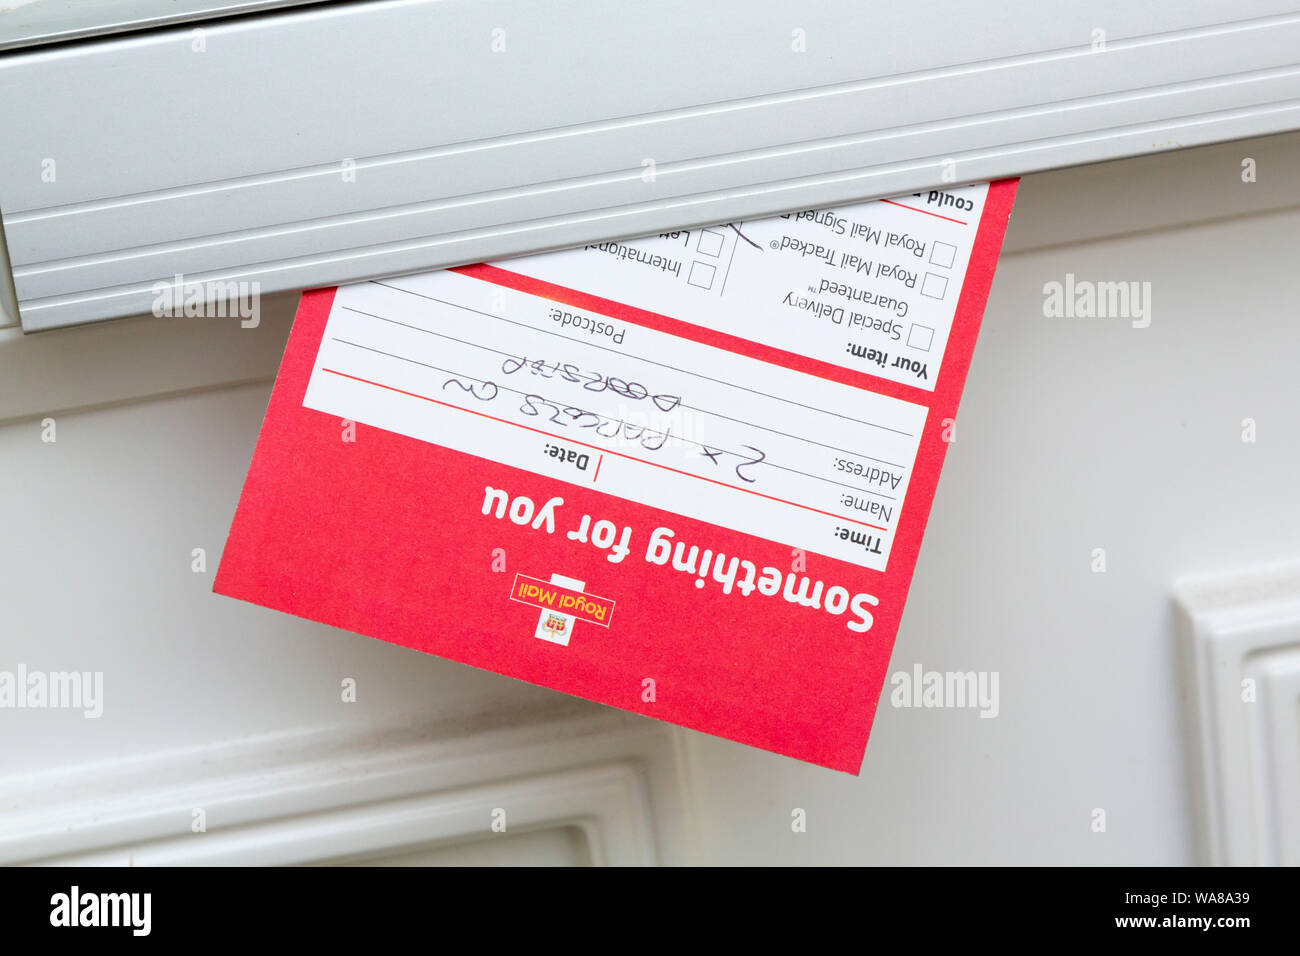 Royal Mail failed delivery note in letterbox Stock Photo